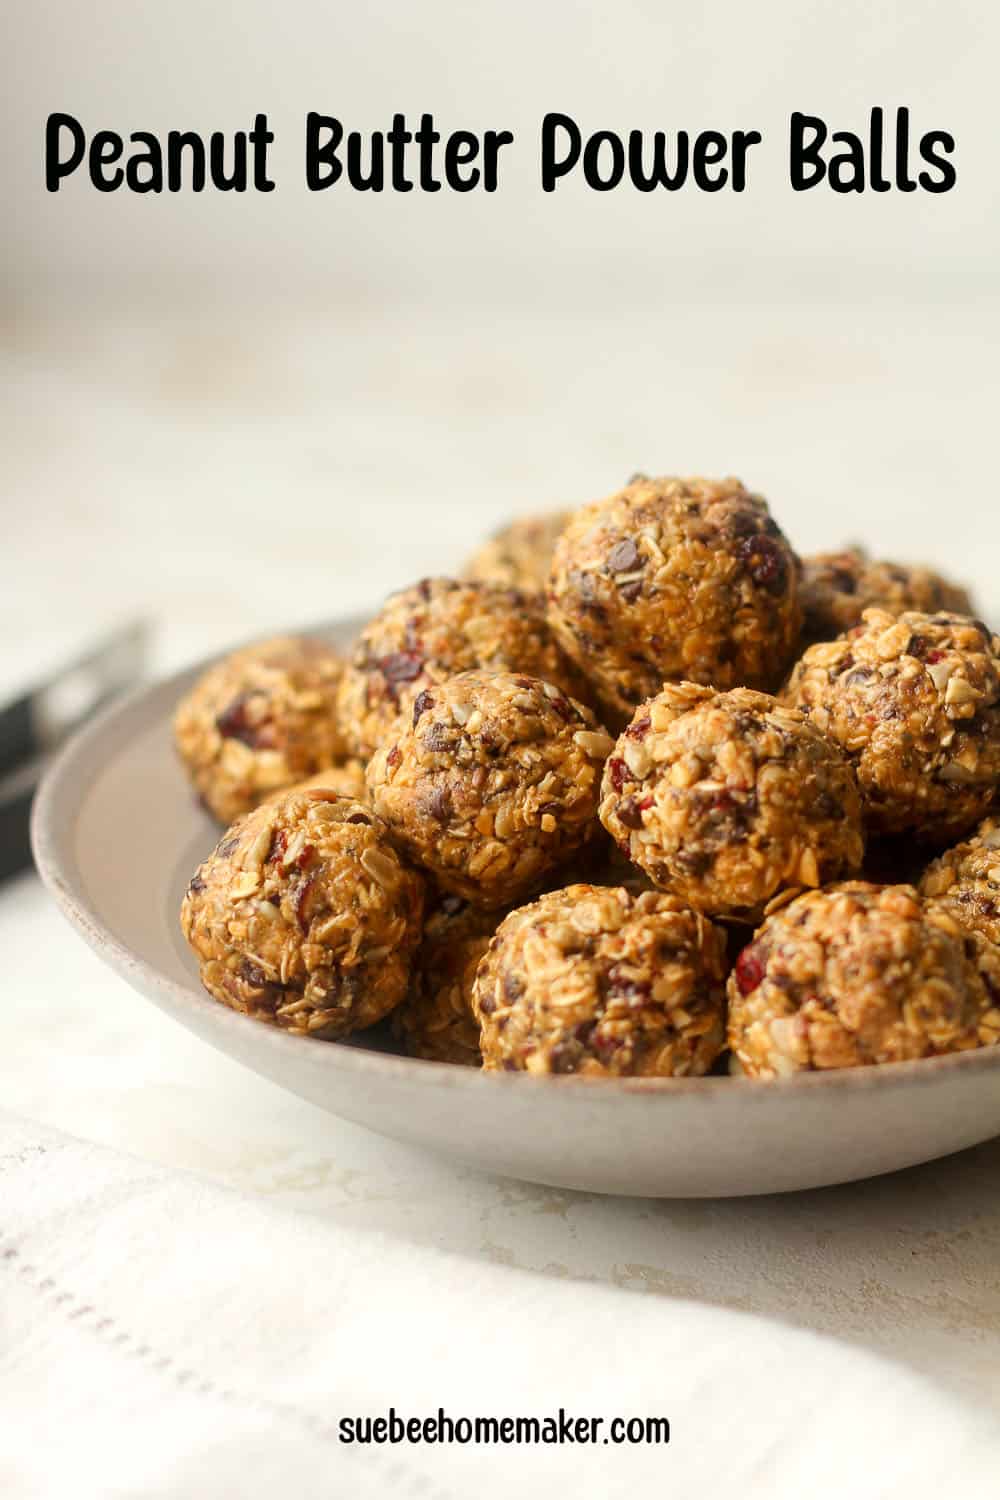 Side view of a bowl of power balls with peanut butter and chocolate chips.